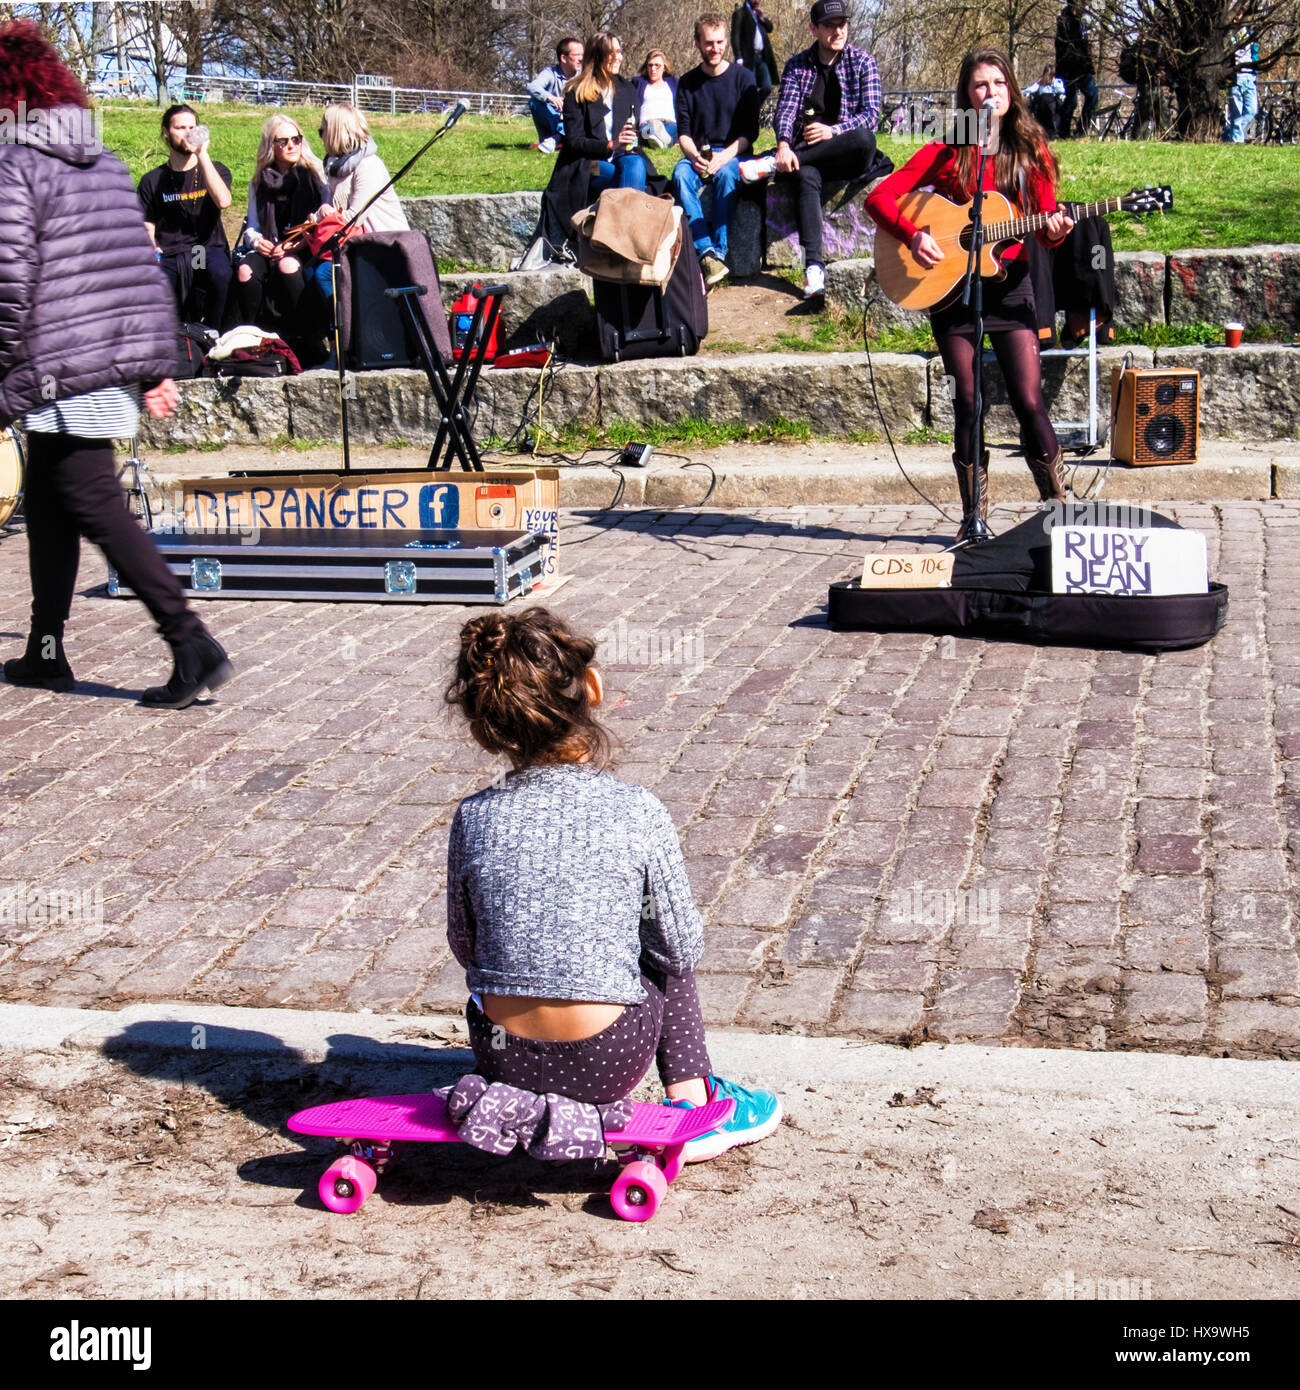 Mauer Park, Berlin, Germany, 26th March 2017. The Clocks moved forward  today and Berliners ventured outdoors to enjoy the warm Spring sunshine in  the City Parks. A child sitting on a skate